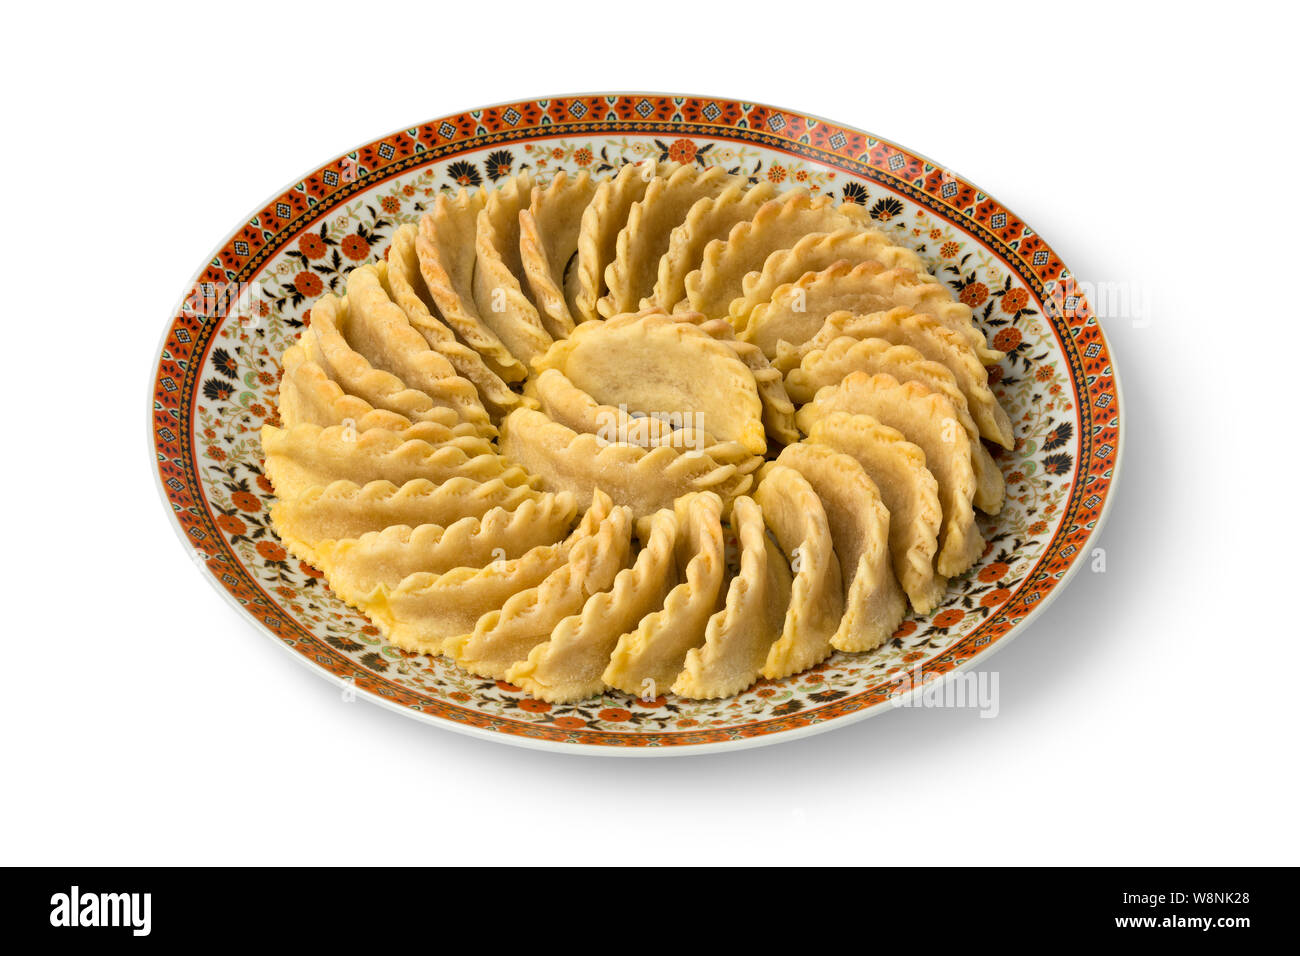 Dish with traditional festive Gazelle Horns cookies isolated on white background Stock Photo